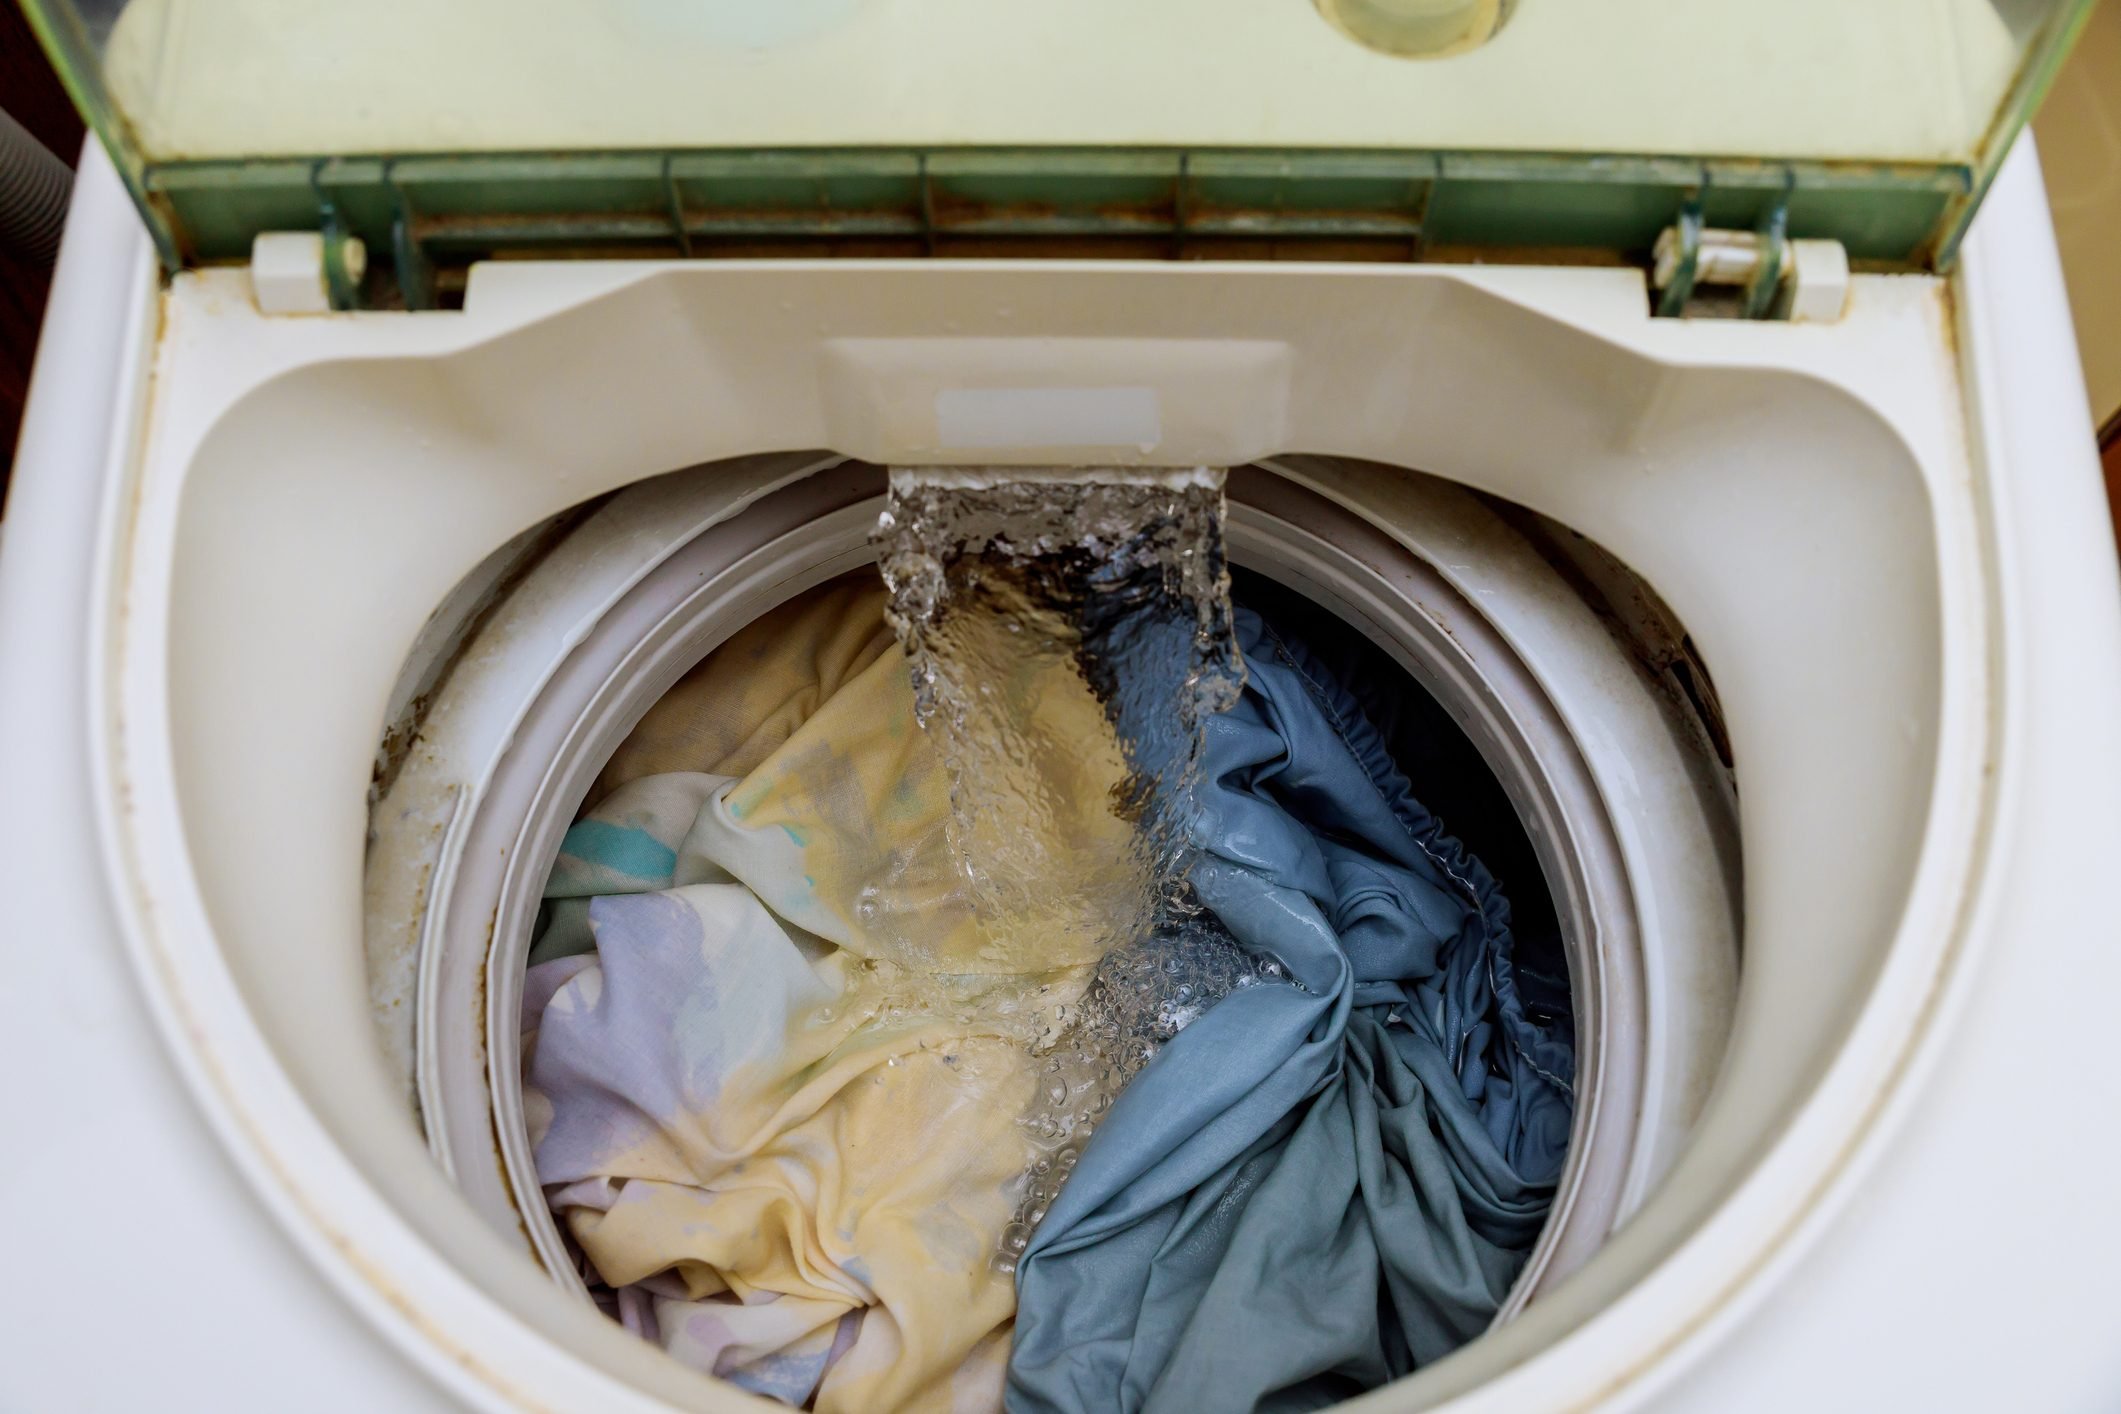 How to Clean a Top Load Washer: 5 Tips From the Experts 